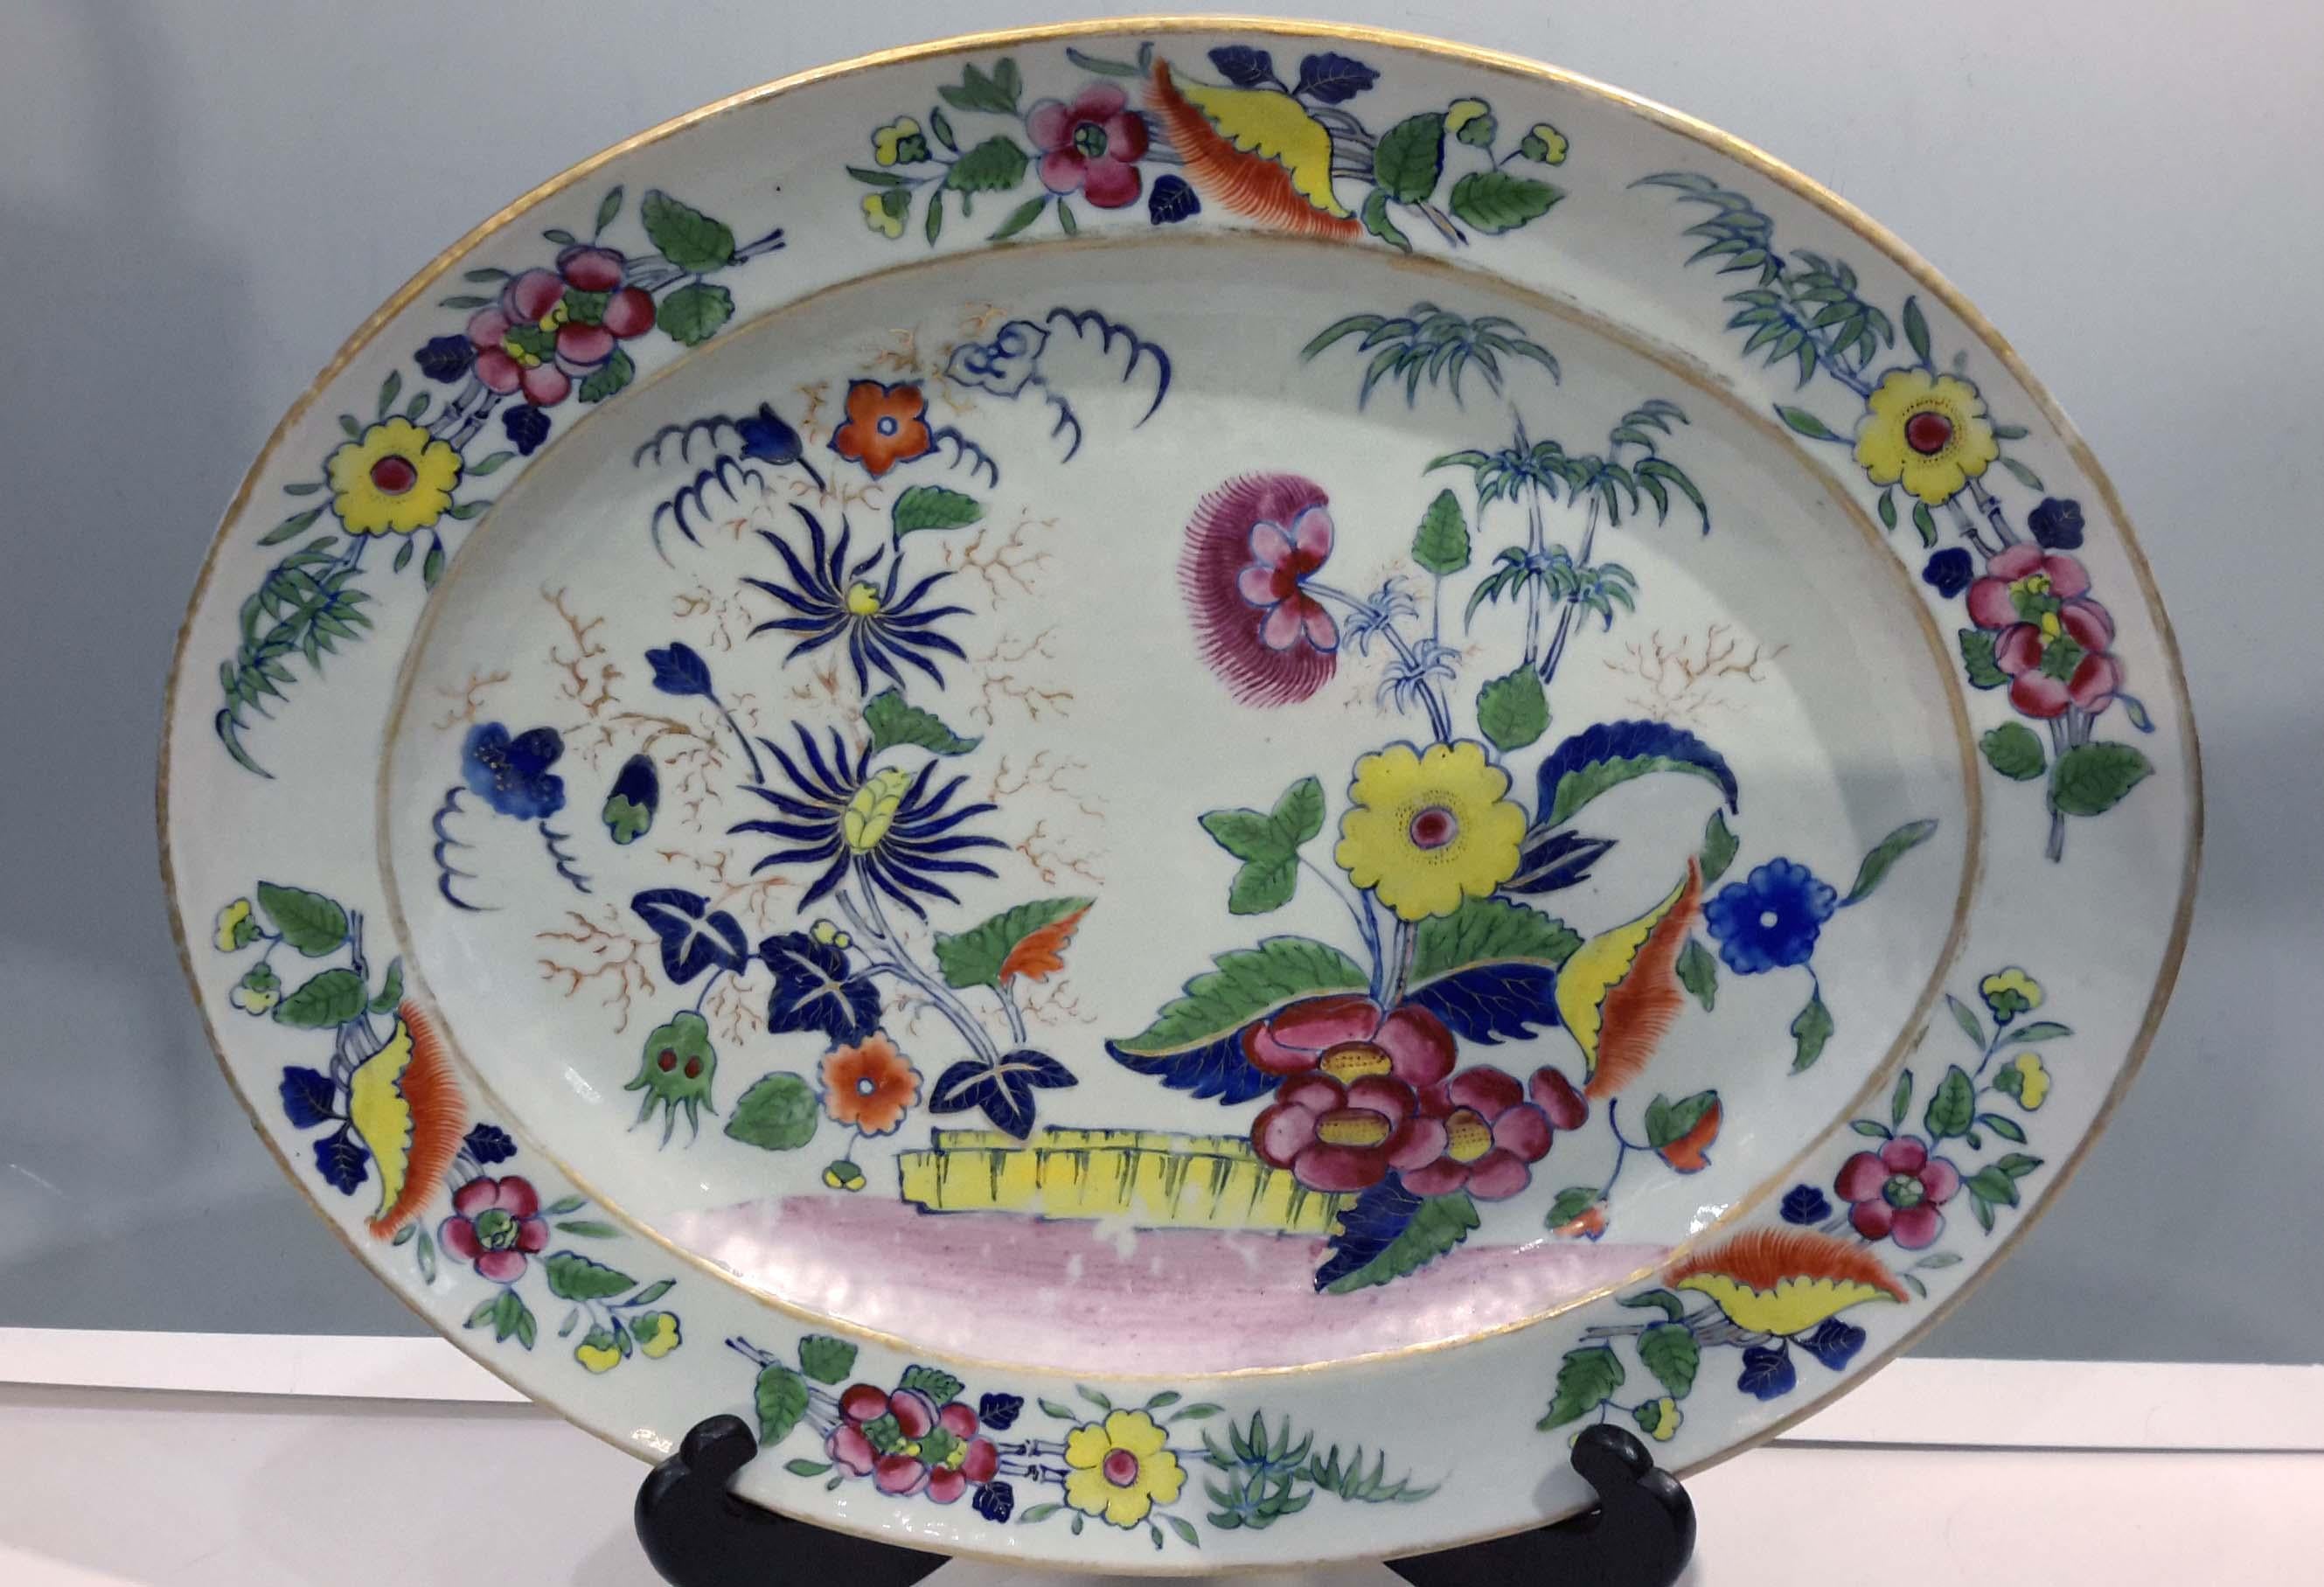 19th century, Chinese export porcelain platter. Beautifully enameled and gilded,
circa mid-19th century and made for export market. It is rare to see this combination of colors, especially the yellow.
  